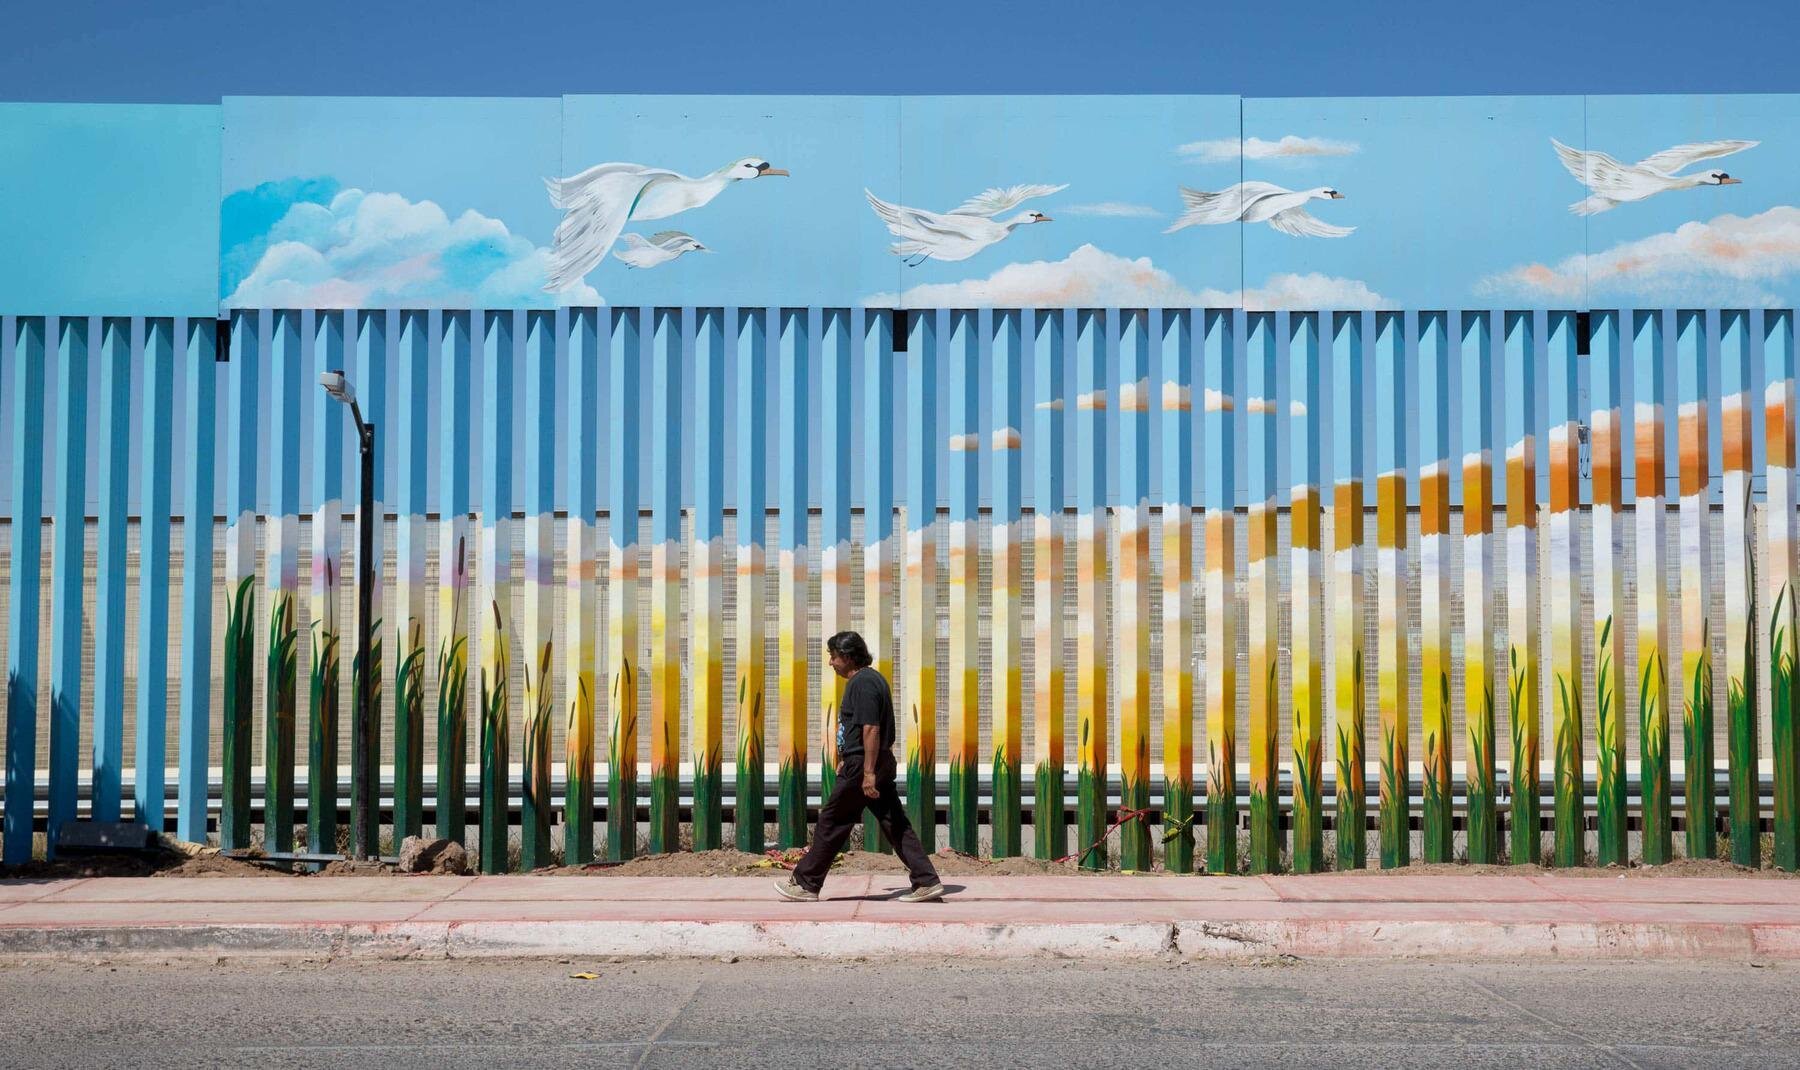 Mexican artists are painting the border wall with the United States to make it disappear.